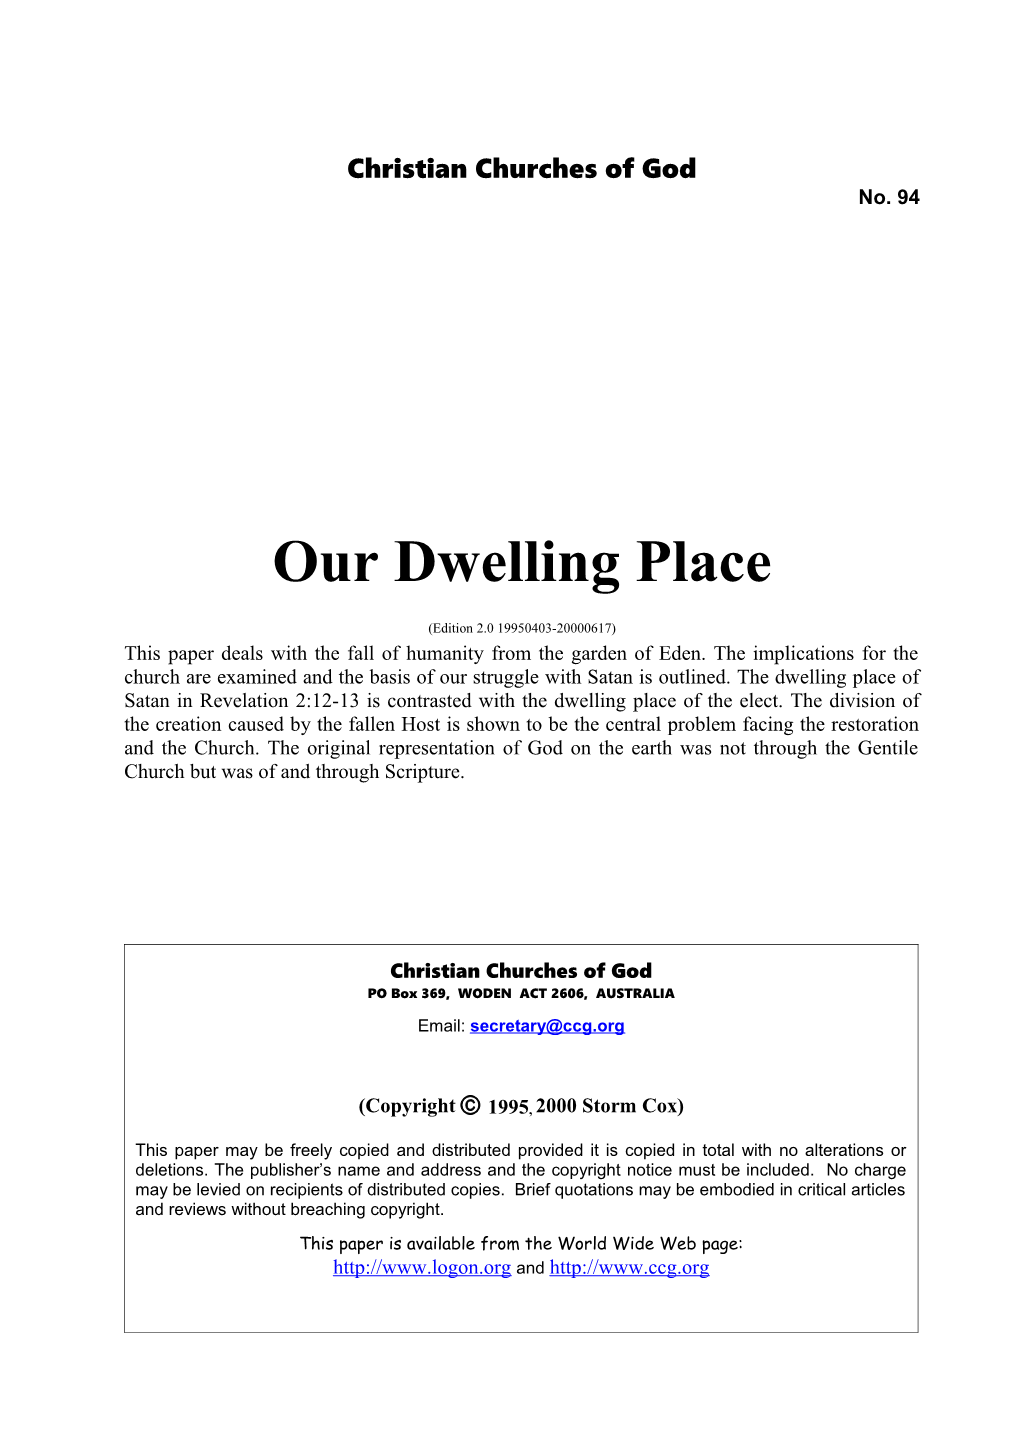 Our Dwelling Place (No. 94)